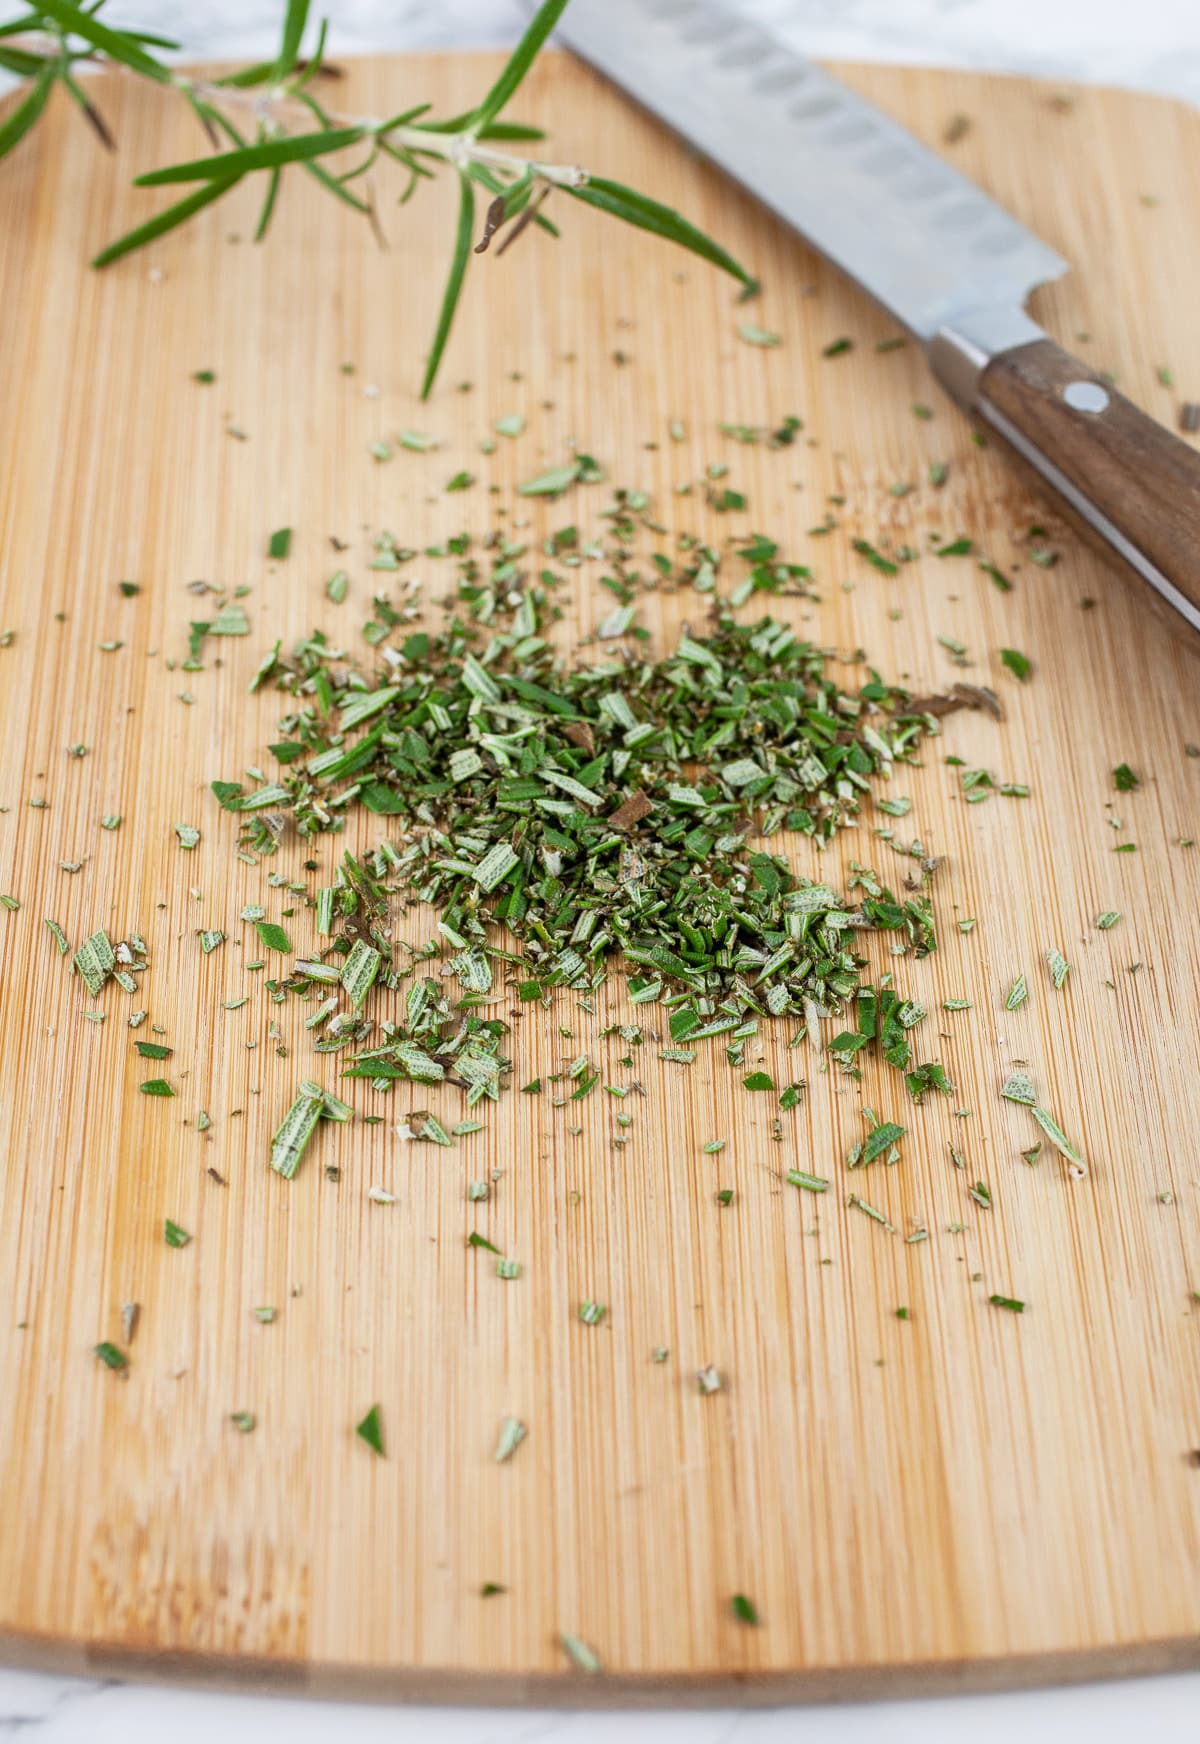 Minced fresh rosemary on wooden cutting board with knife.